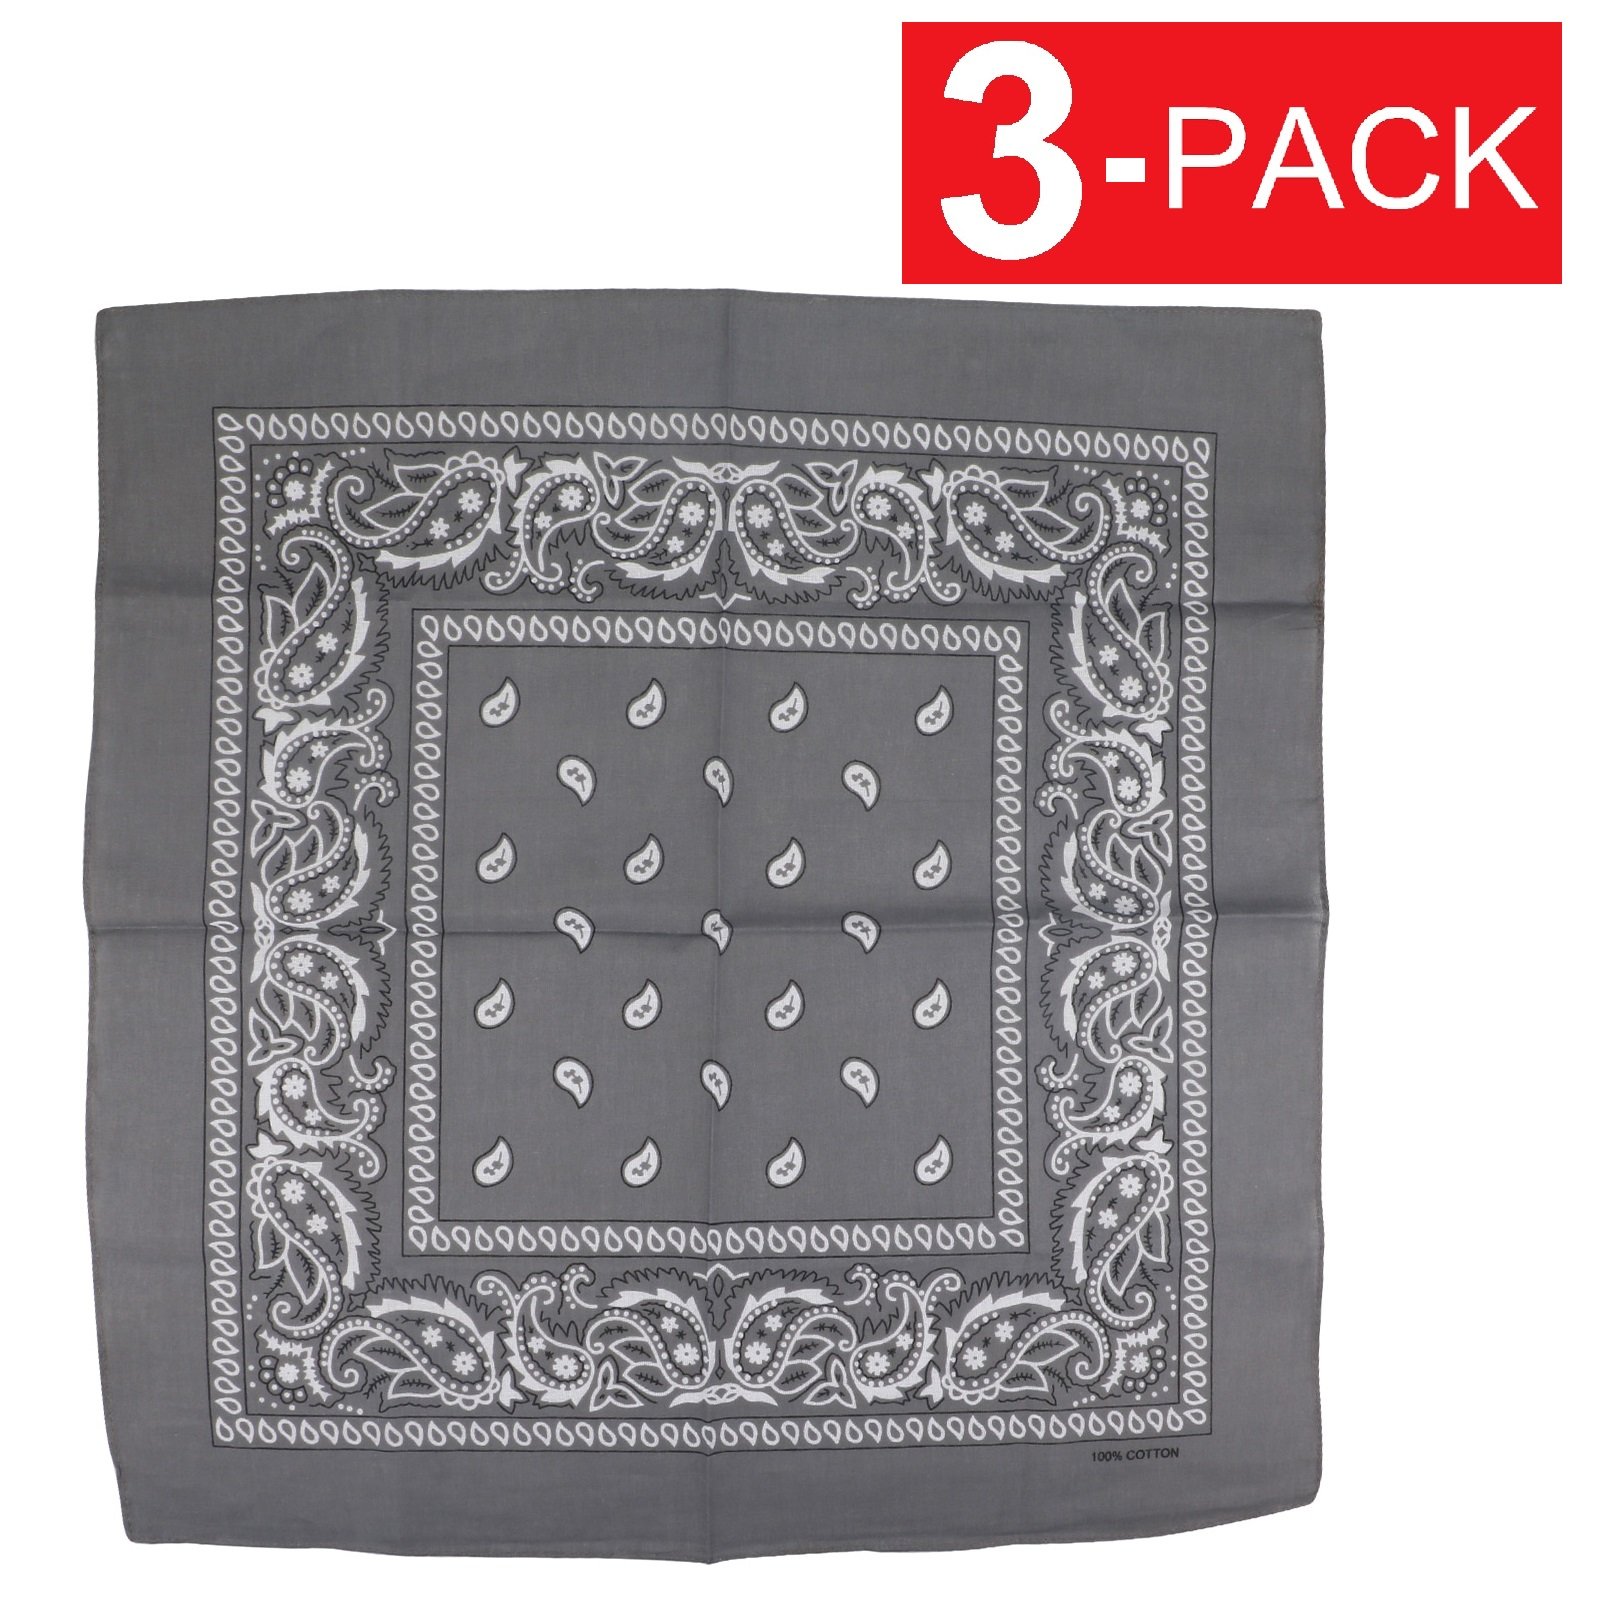 3-Pack Bandana 100% Cotton Paisley Print Double-Sided Scarf Head Neck Face  Mask